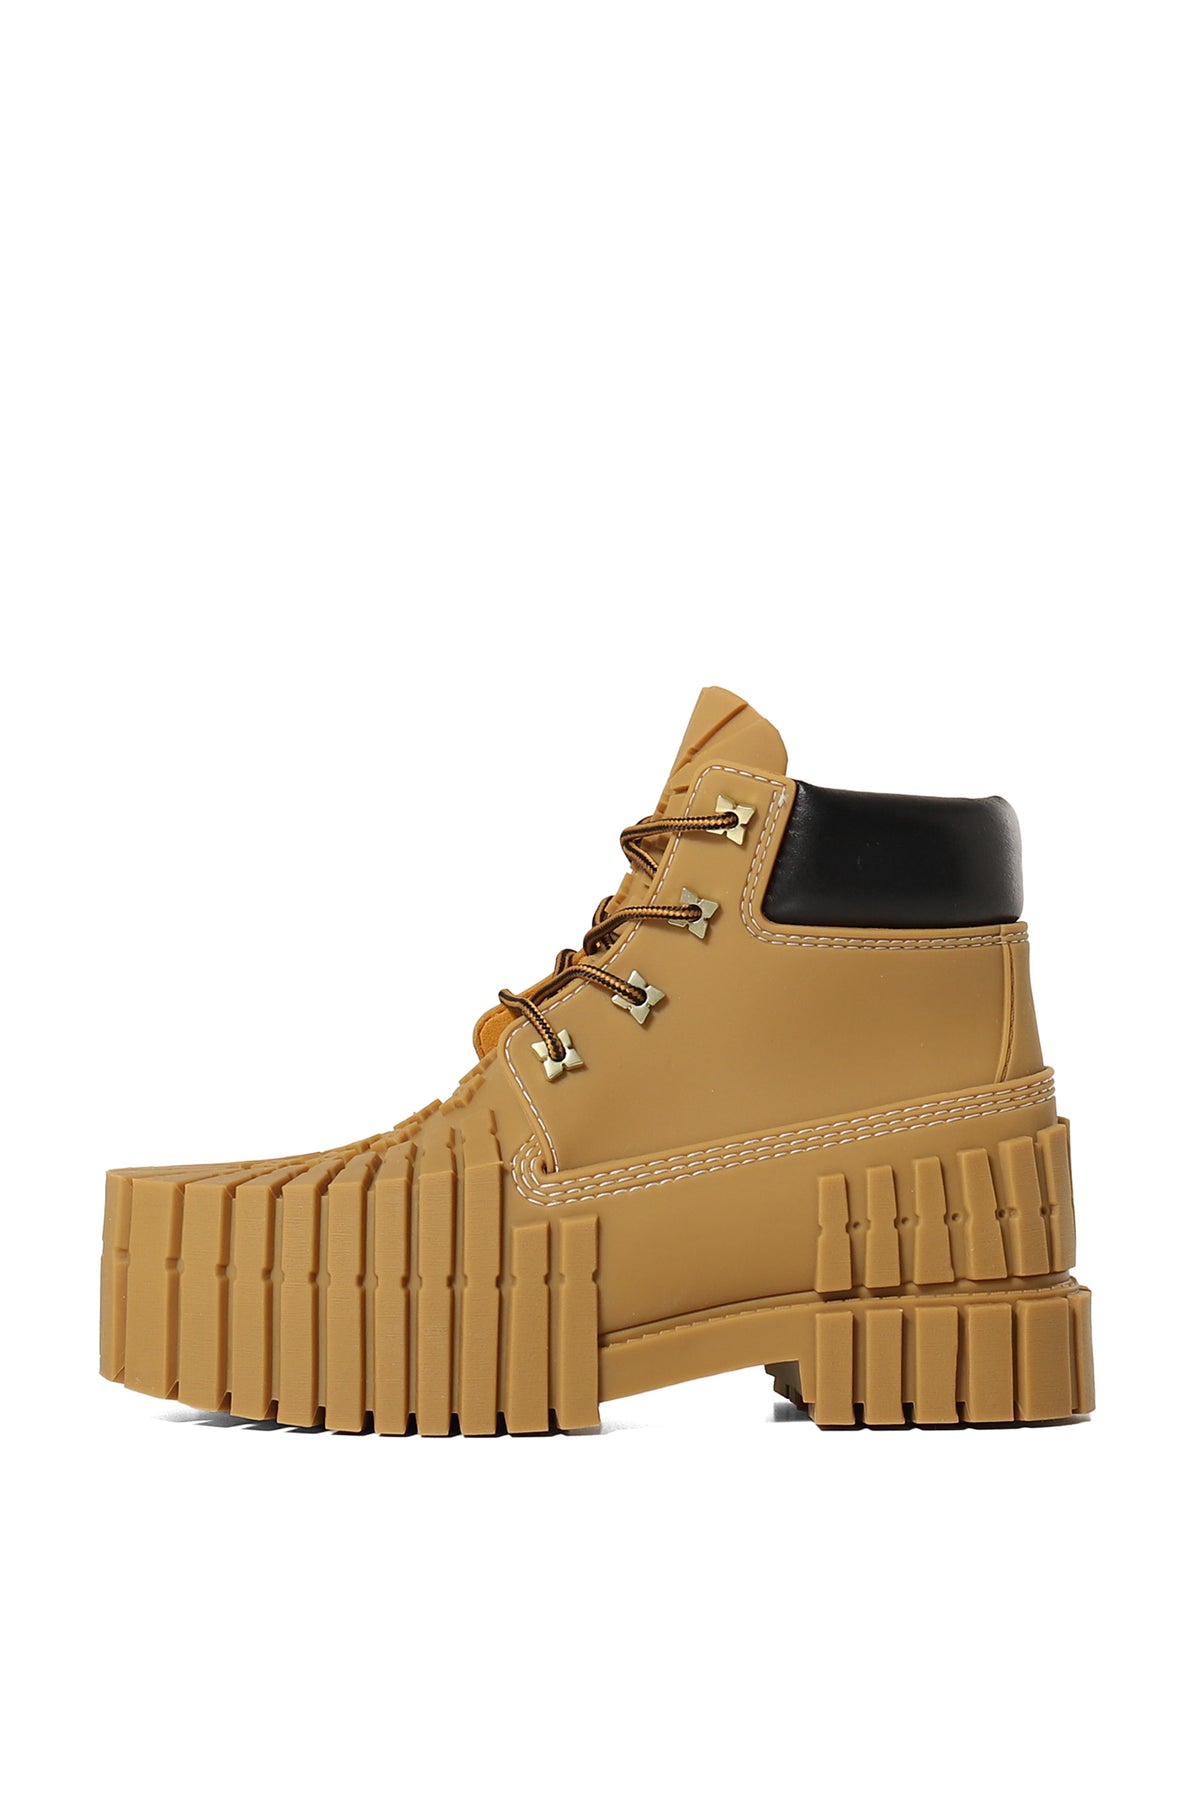 2 x 4 BOOTS / WHEAT